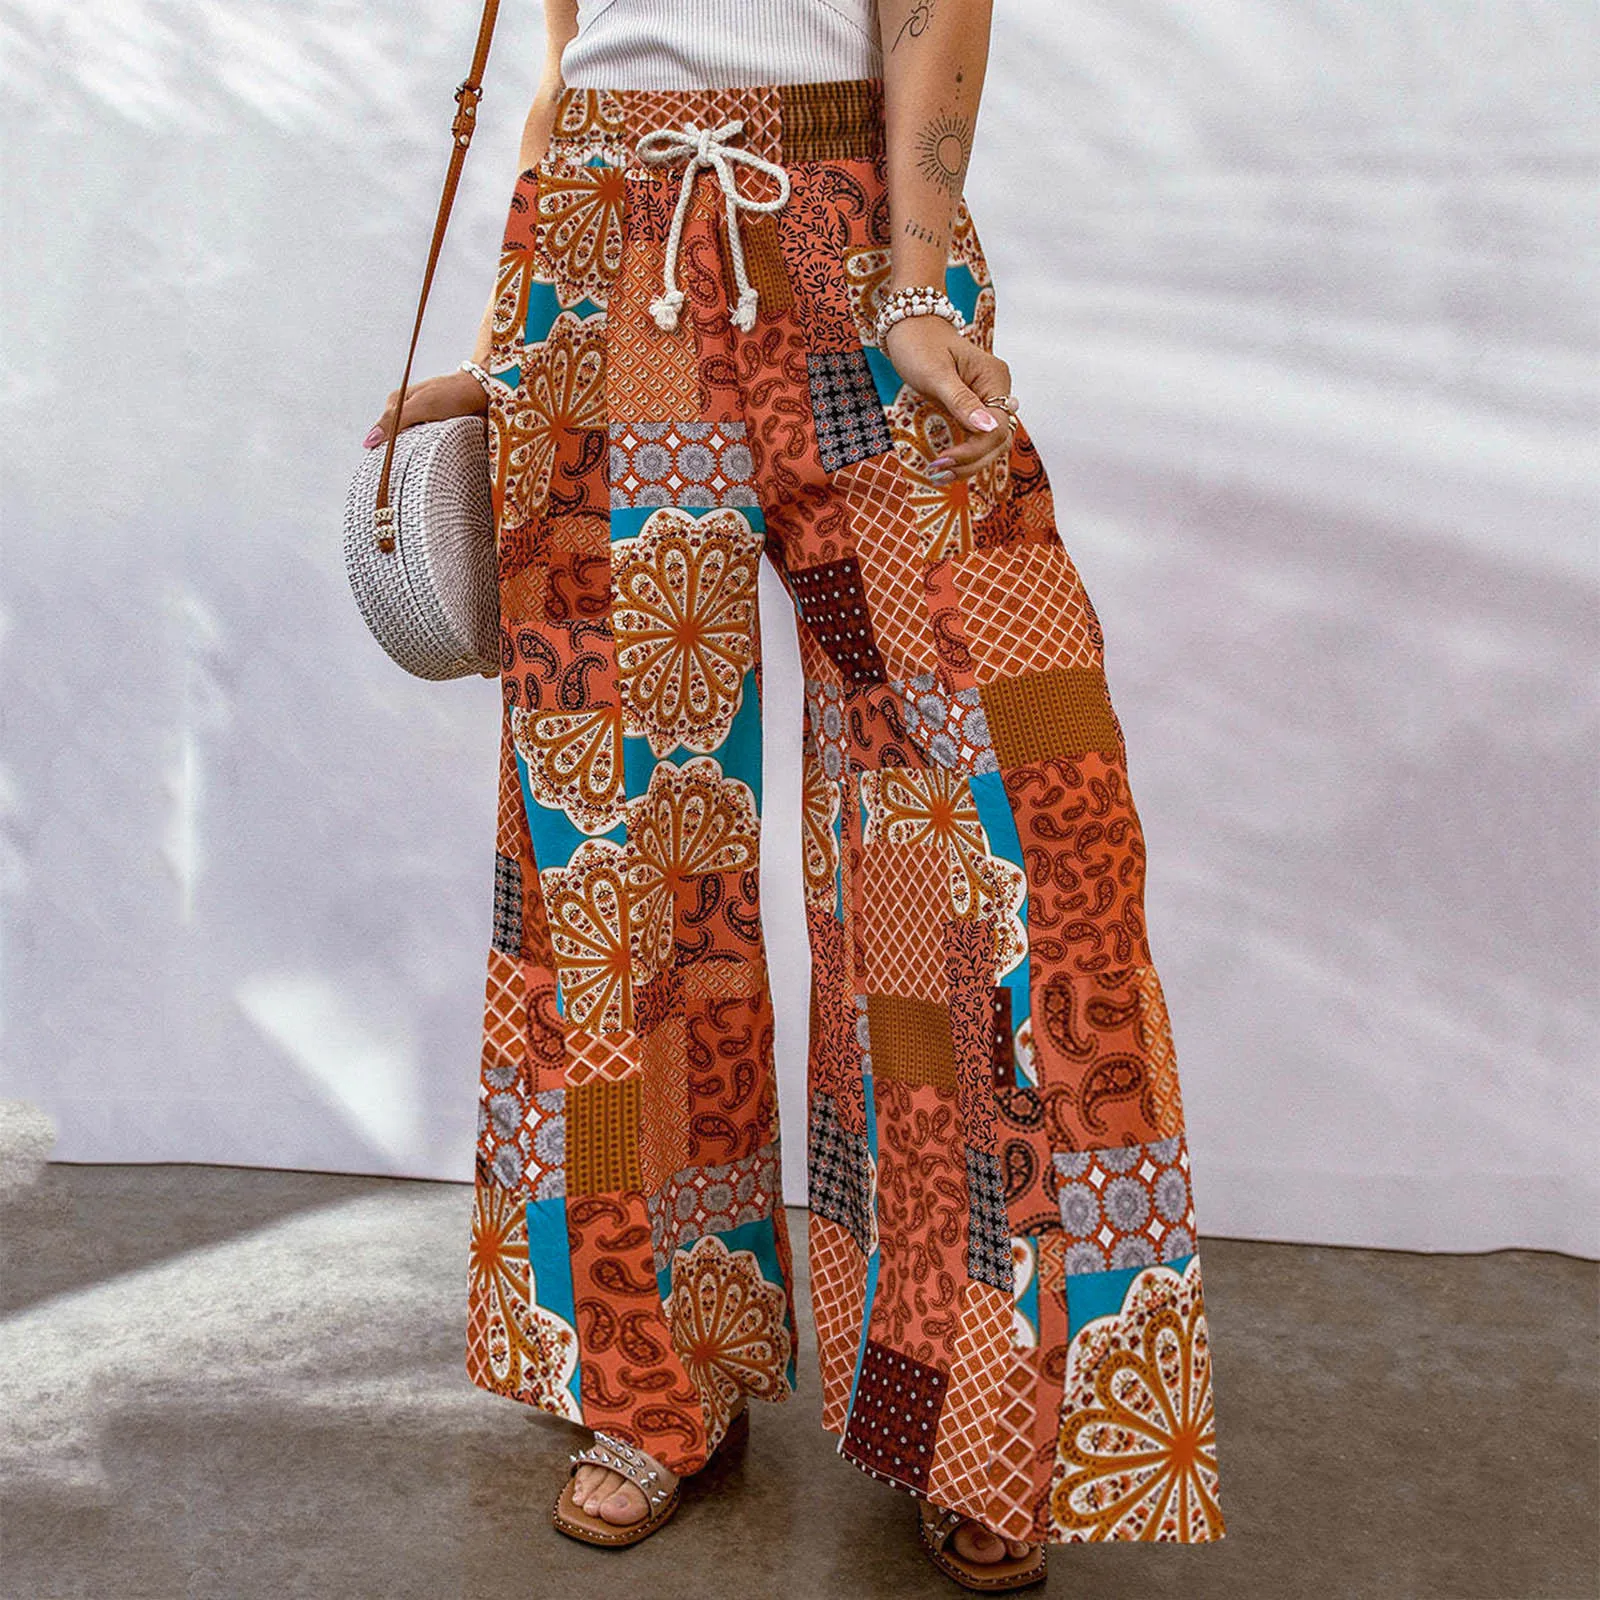 Boho Wide Leg Pants For Women High Waist Western Ethnic Color Block Floral Beach Pants With Pockets Ladies Loose Casual Trousers